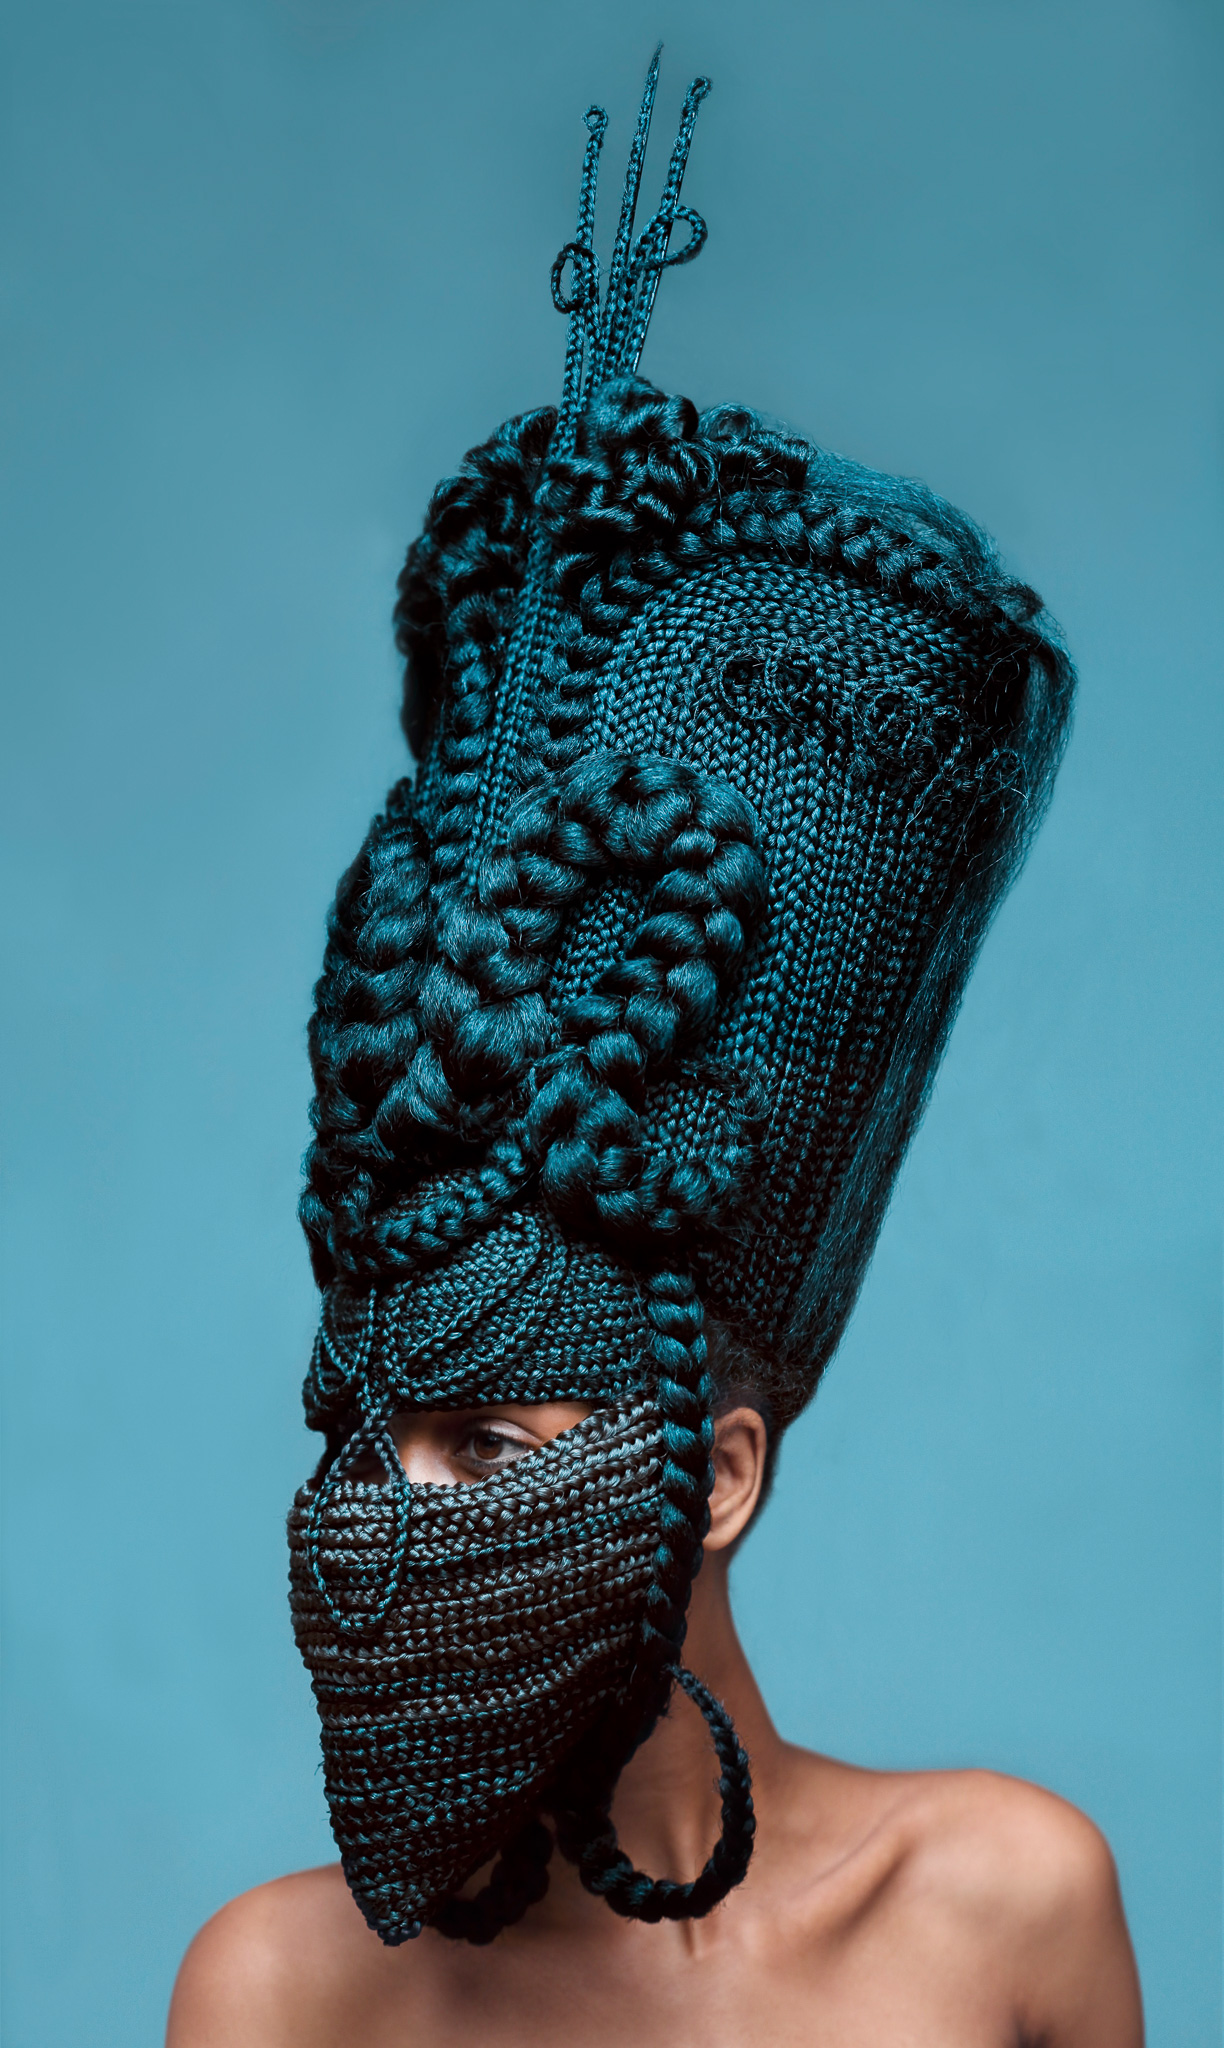 The Wick - Delphine Diallo, Highness Blue (Hybrid 1), 2011 © Courtesy of MTArt and the artist.